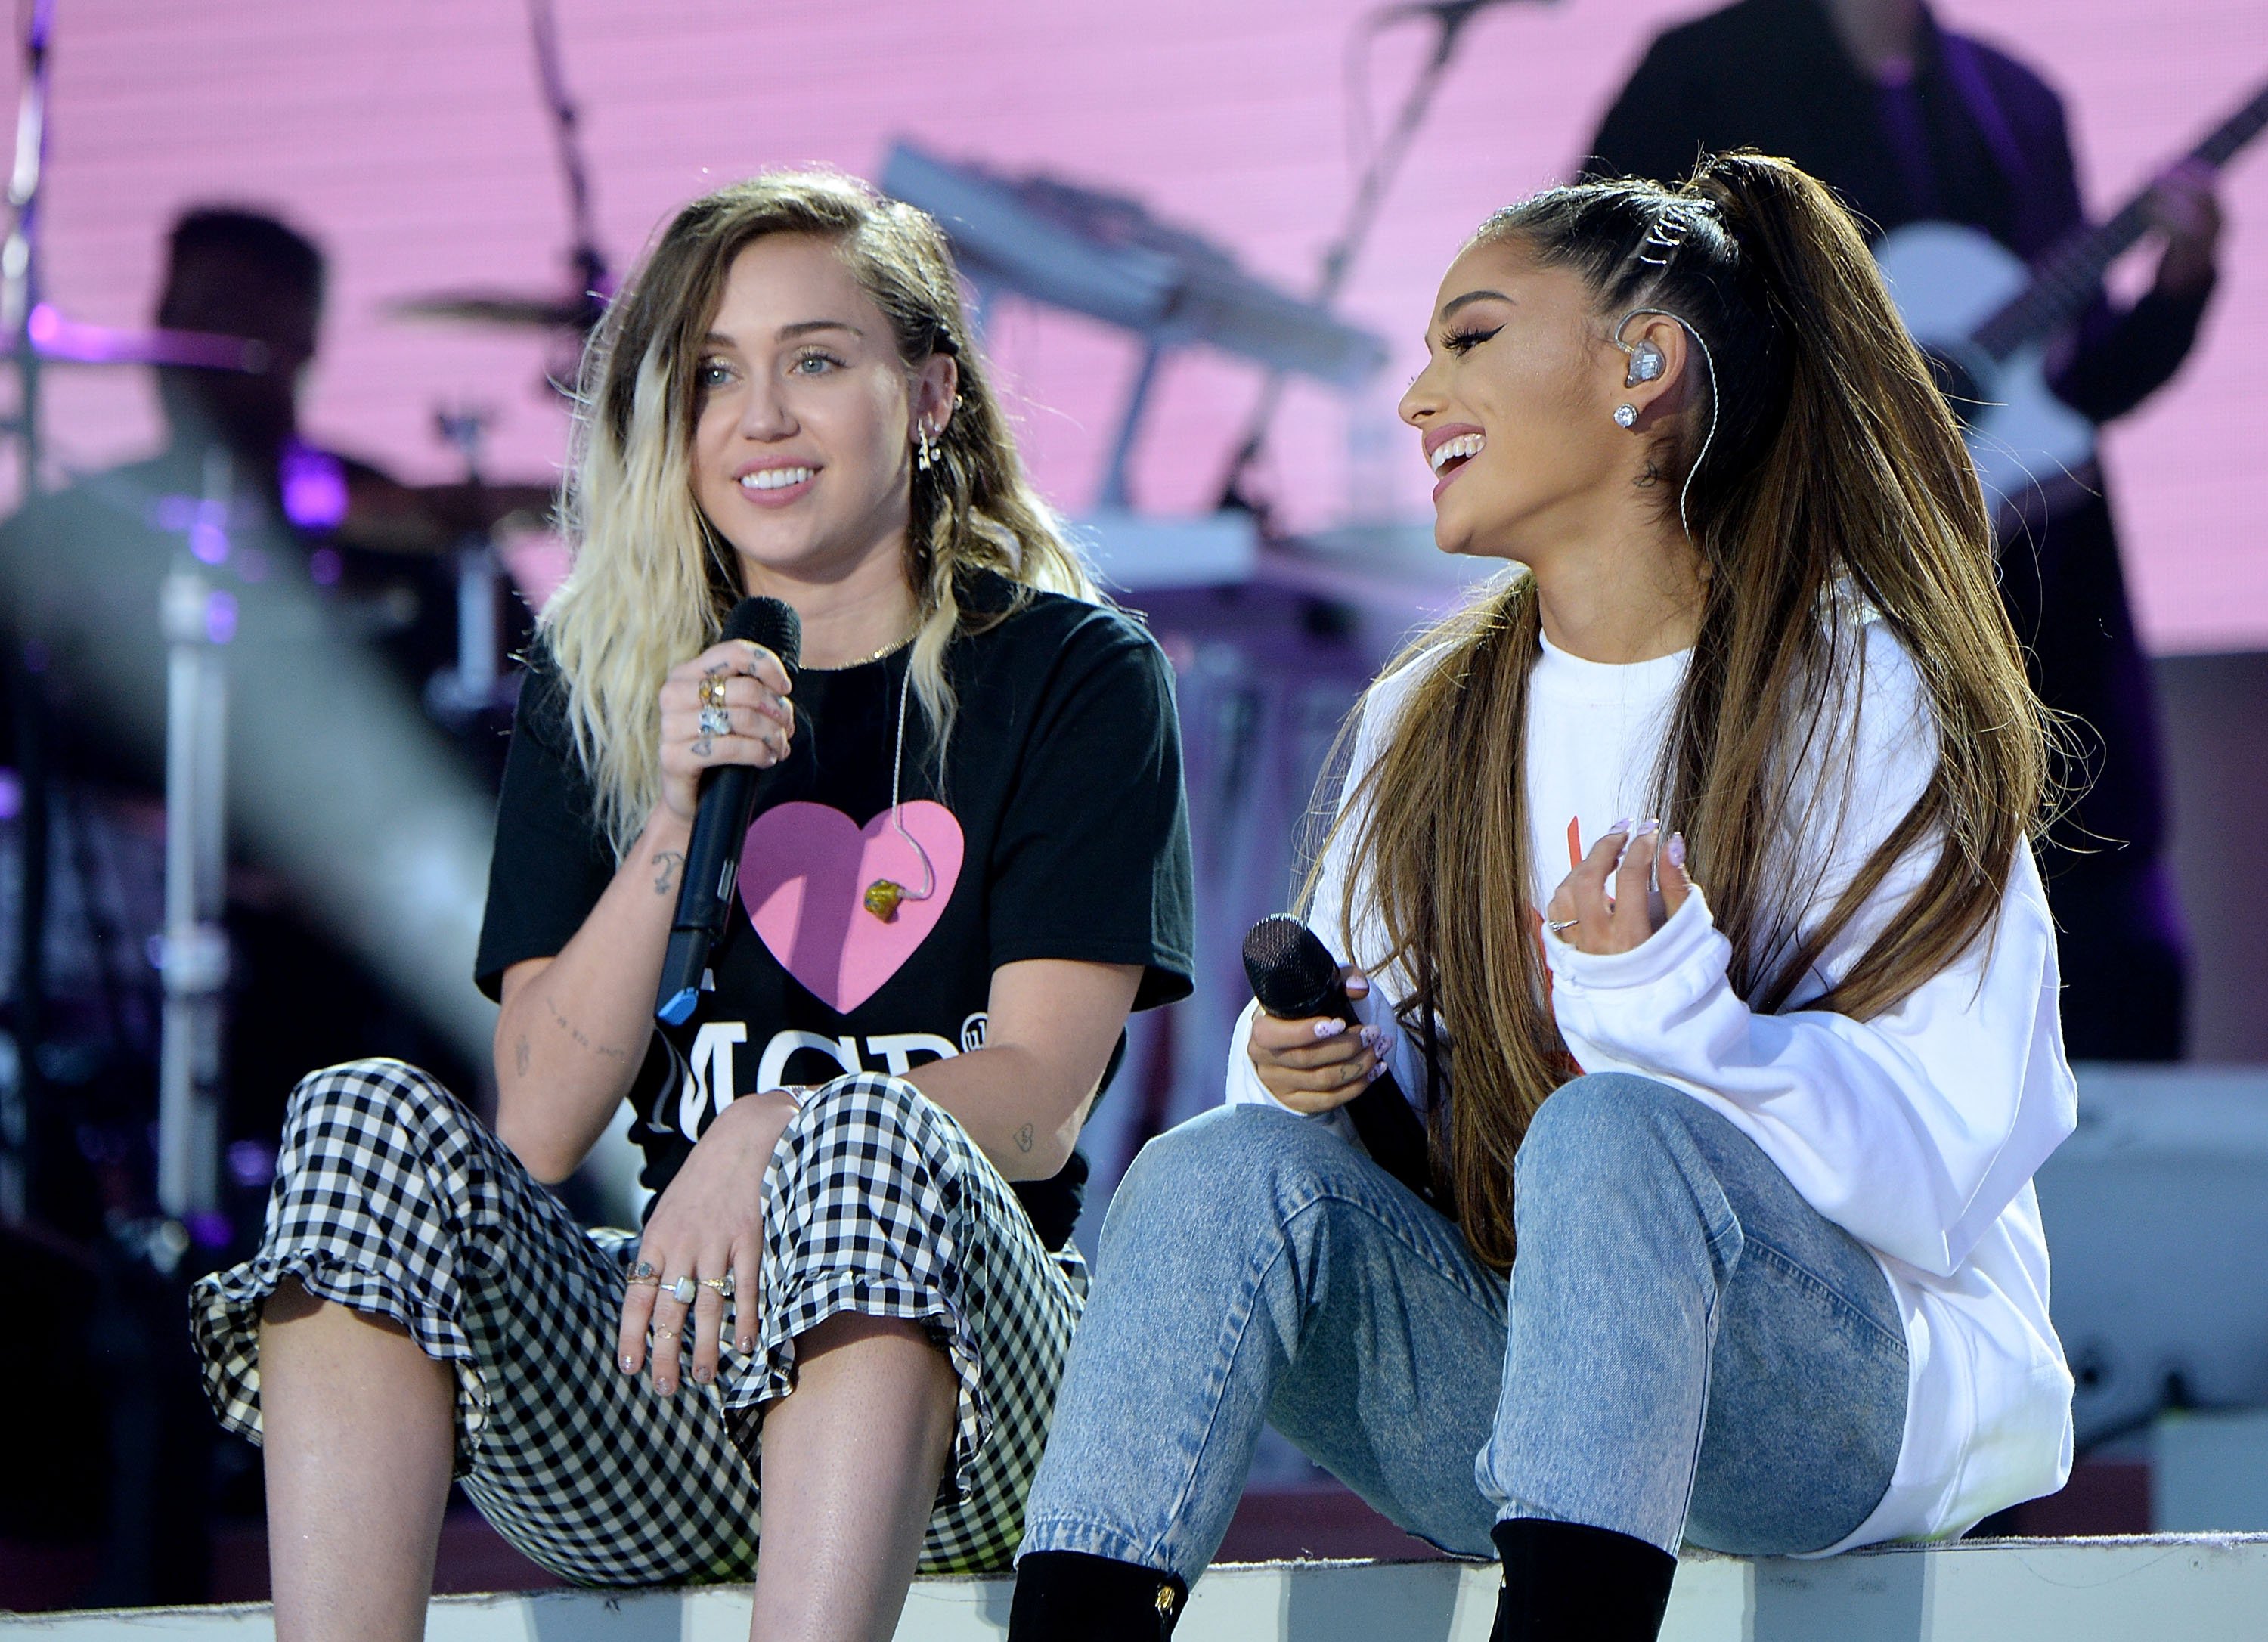 Ariana Grande (R) and Miley Cyrus perform on stage during the One Love Manchester Benefit Concert on June 4, 2017, in Manchester, England.